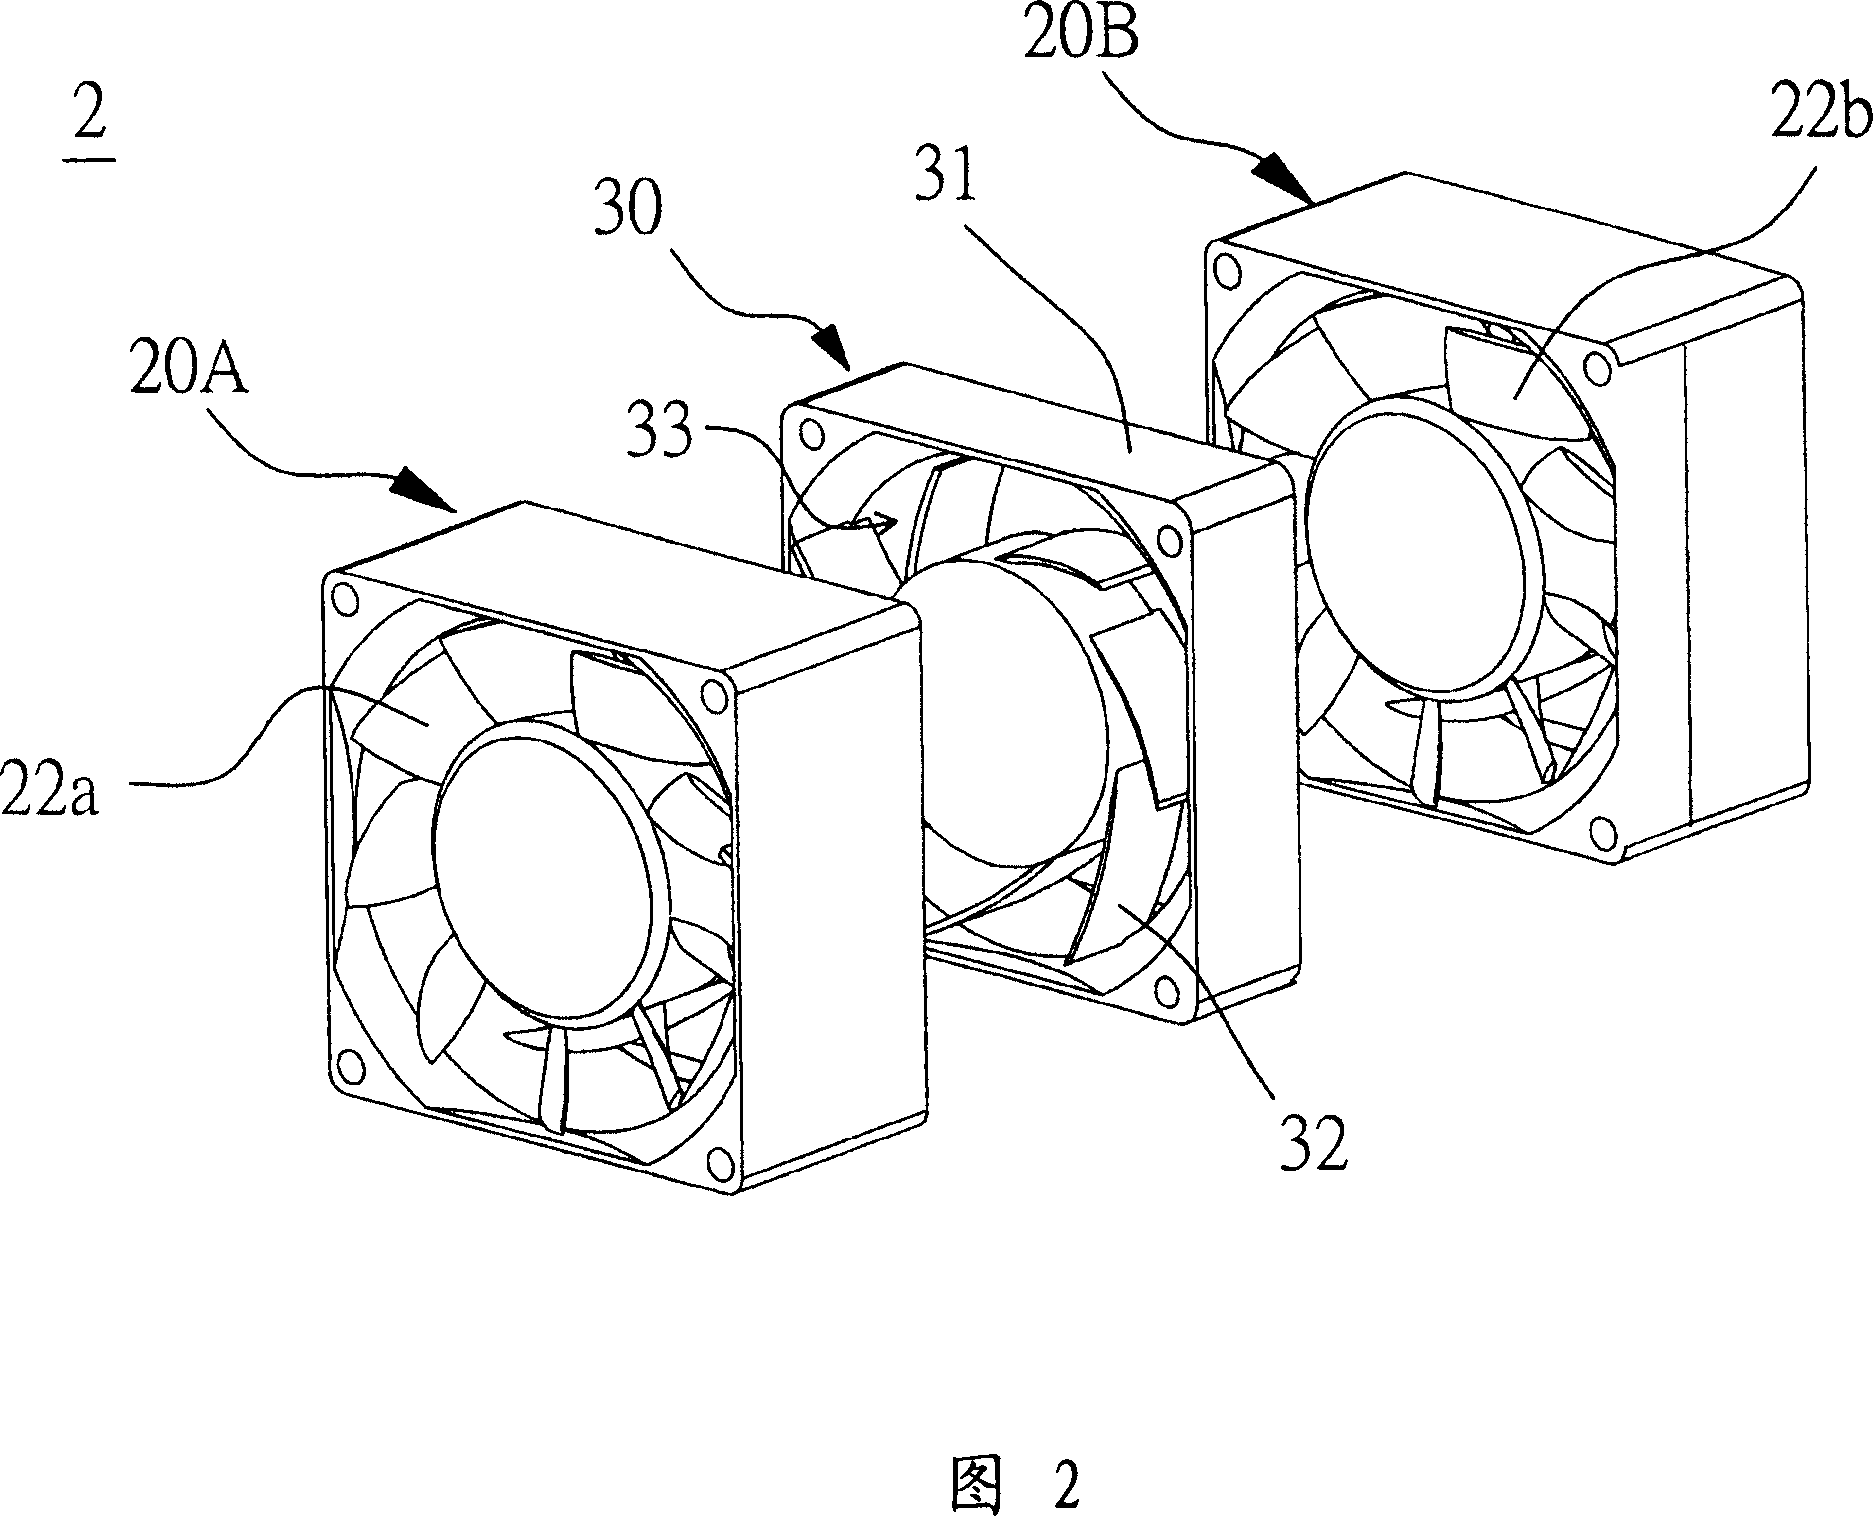 Series fan and its flow guide structure